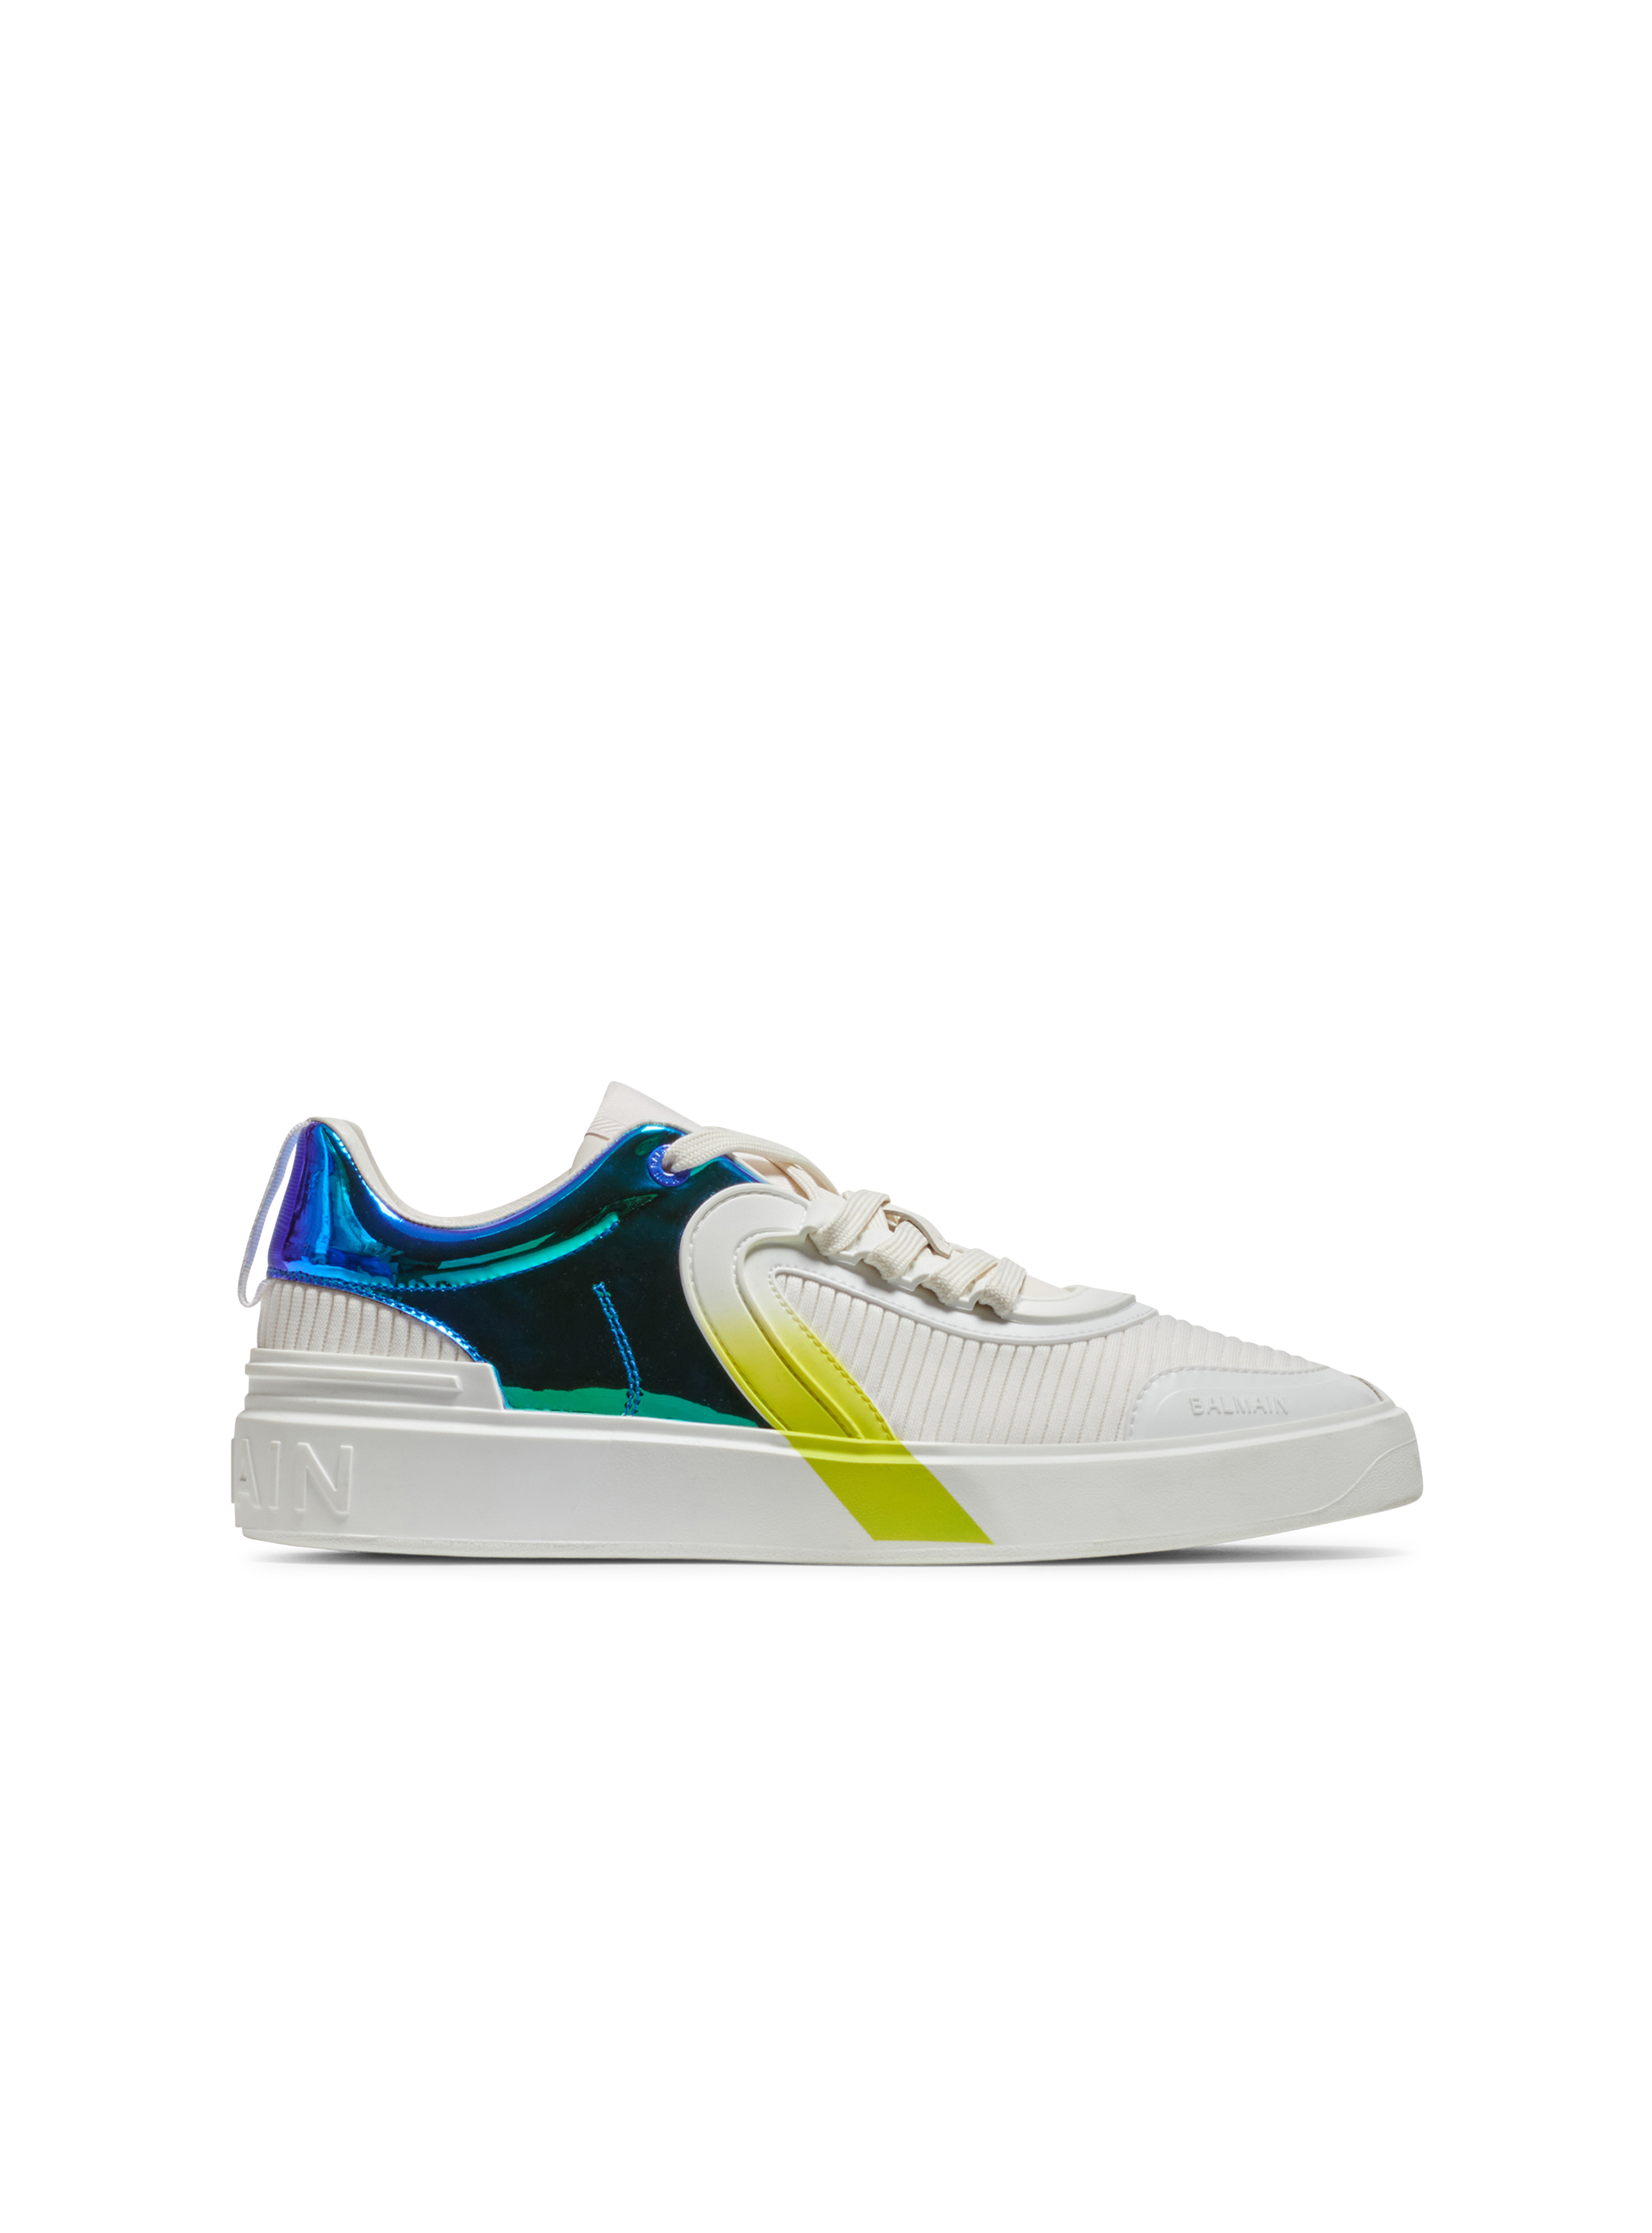 B-Skate trainers in leather and suede, blue